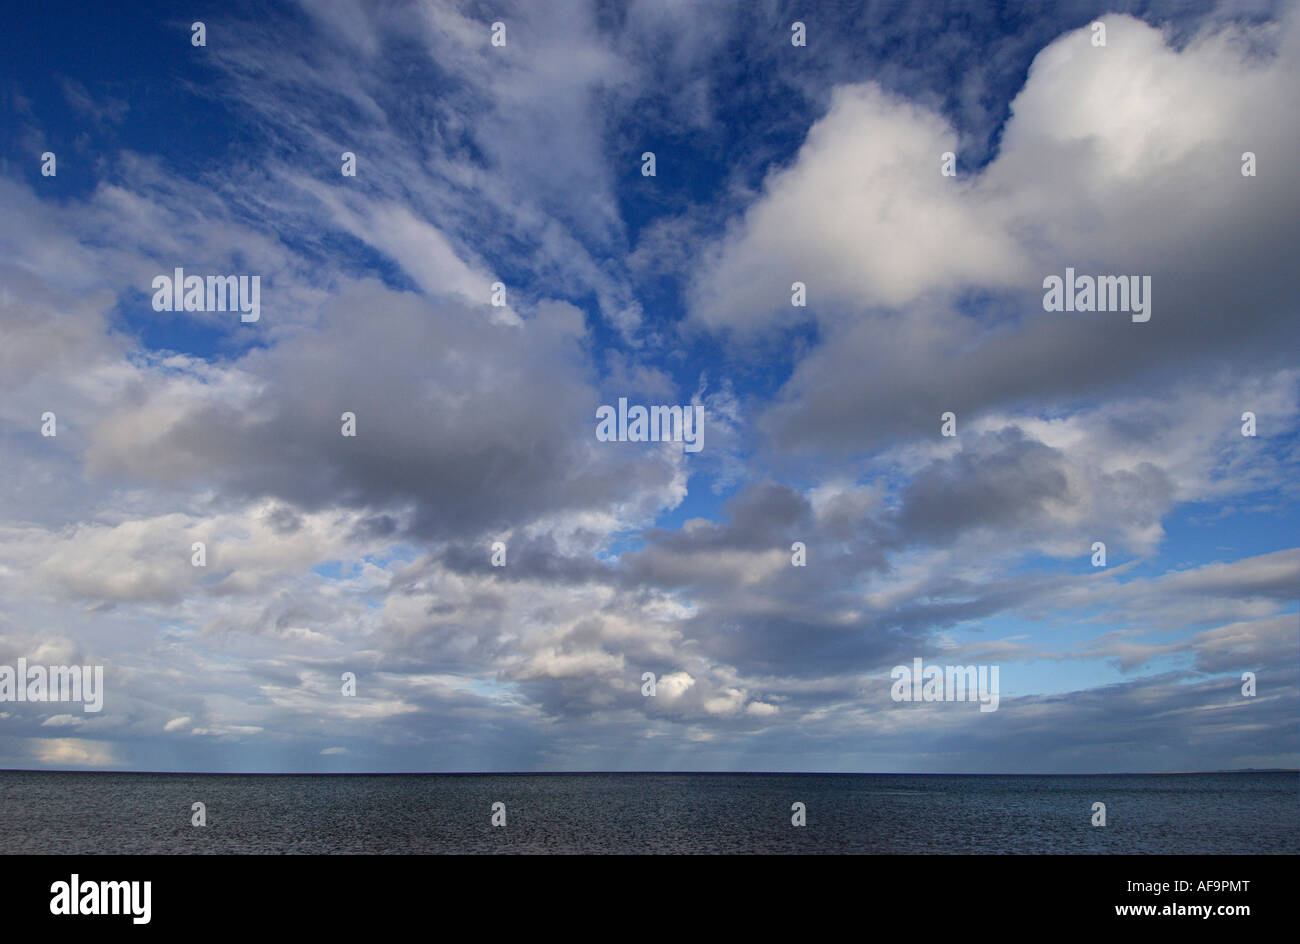 Nimbus E High Resolution Stock Photography and Images - Alamy